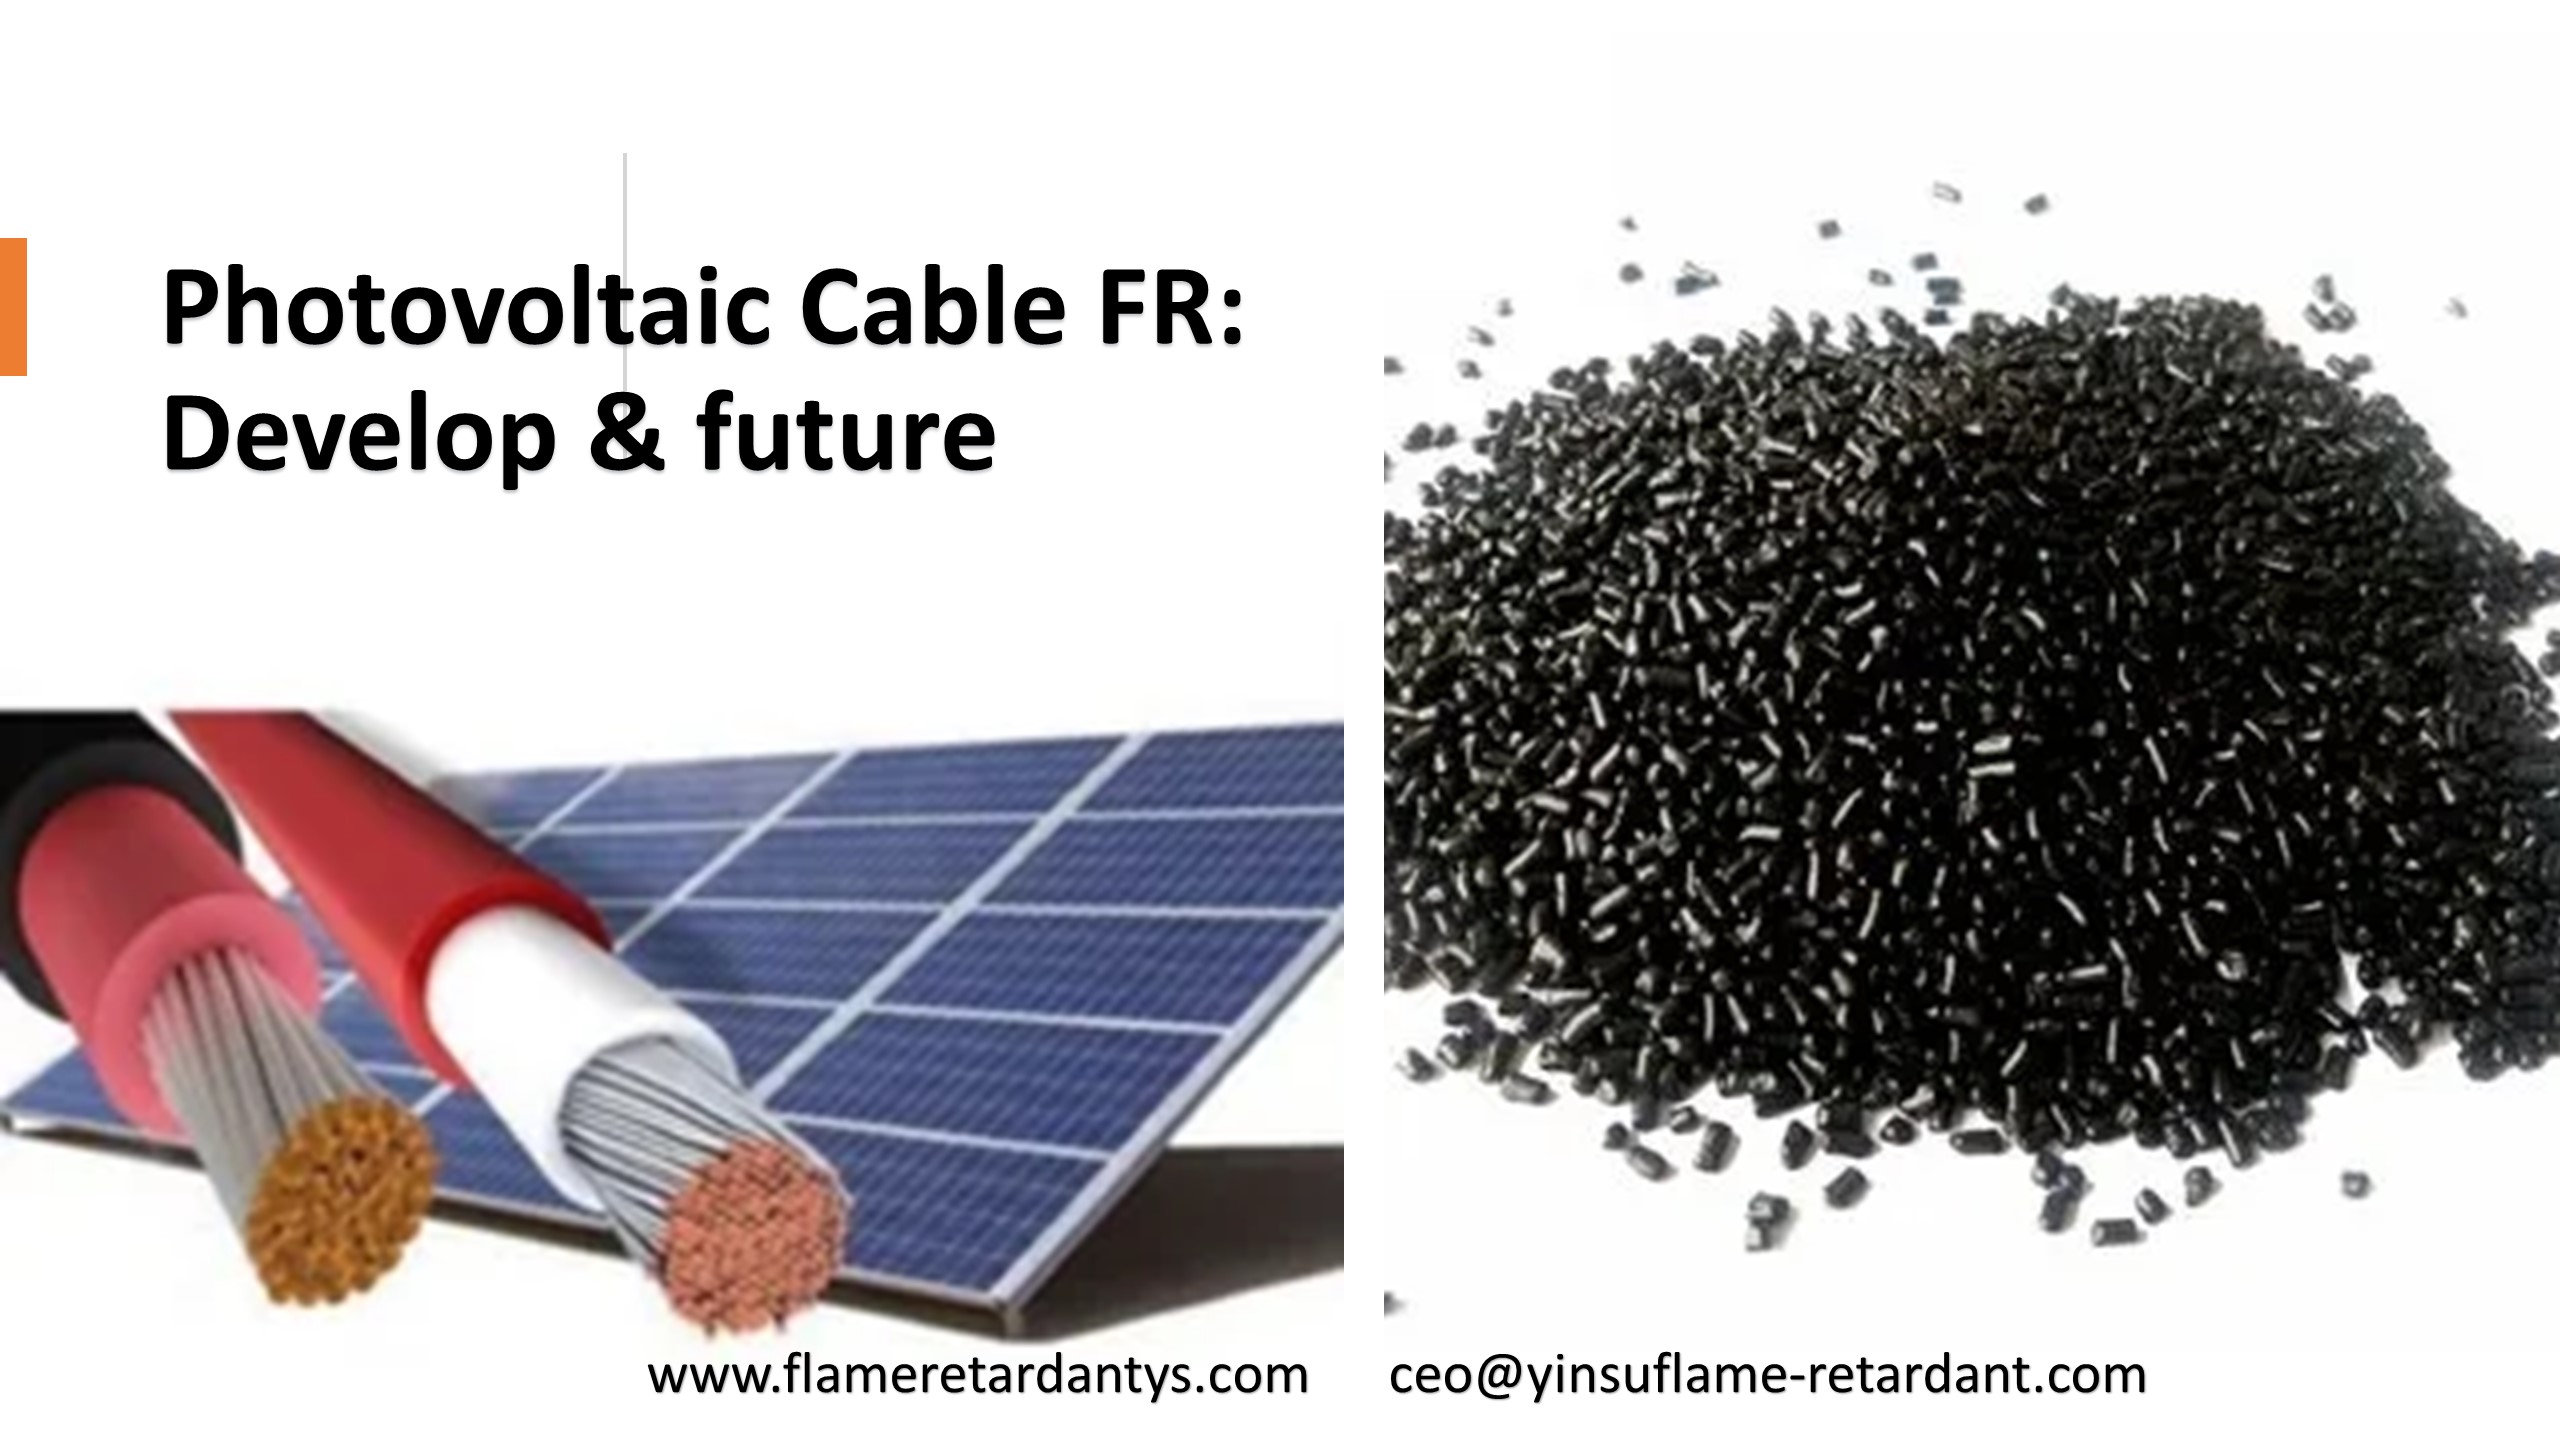 Photovoltaic Cable FR: Develop & future